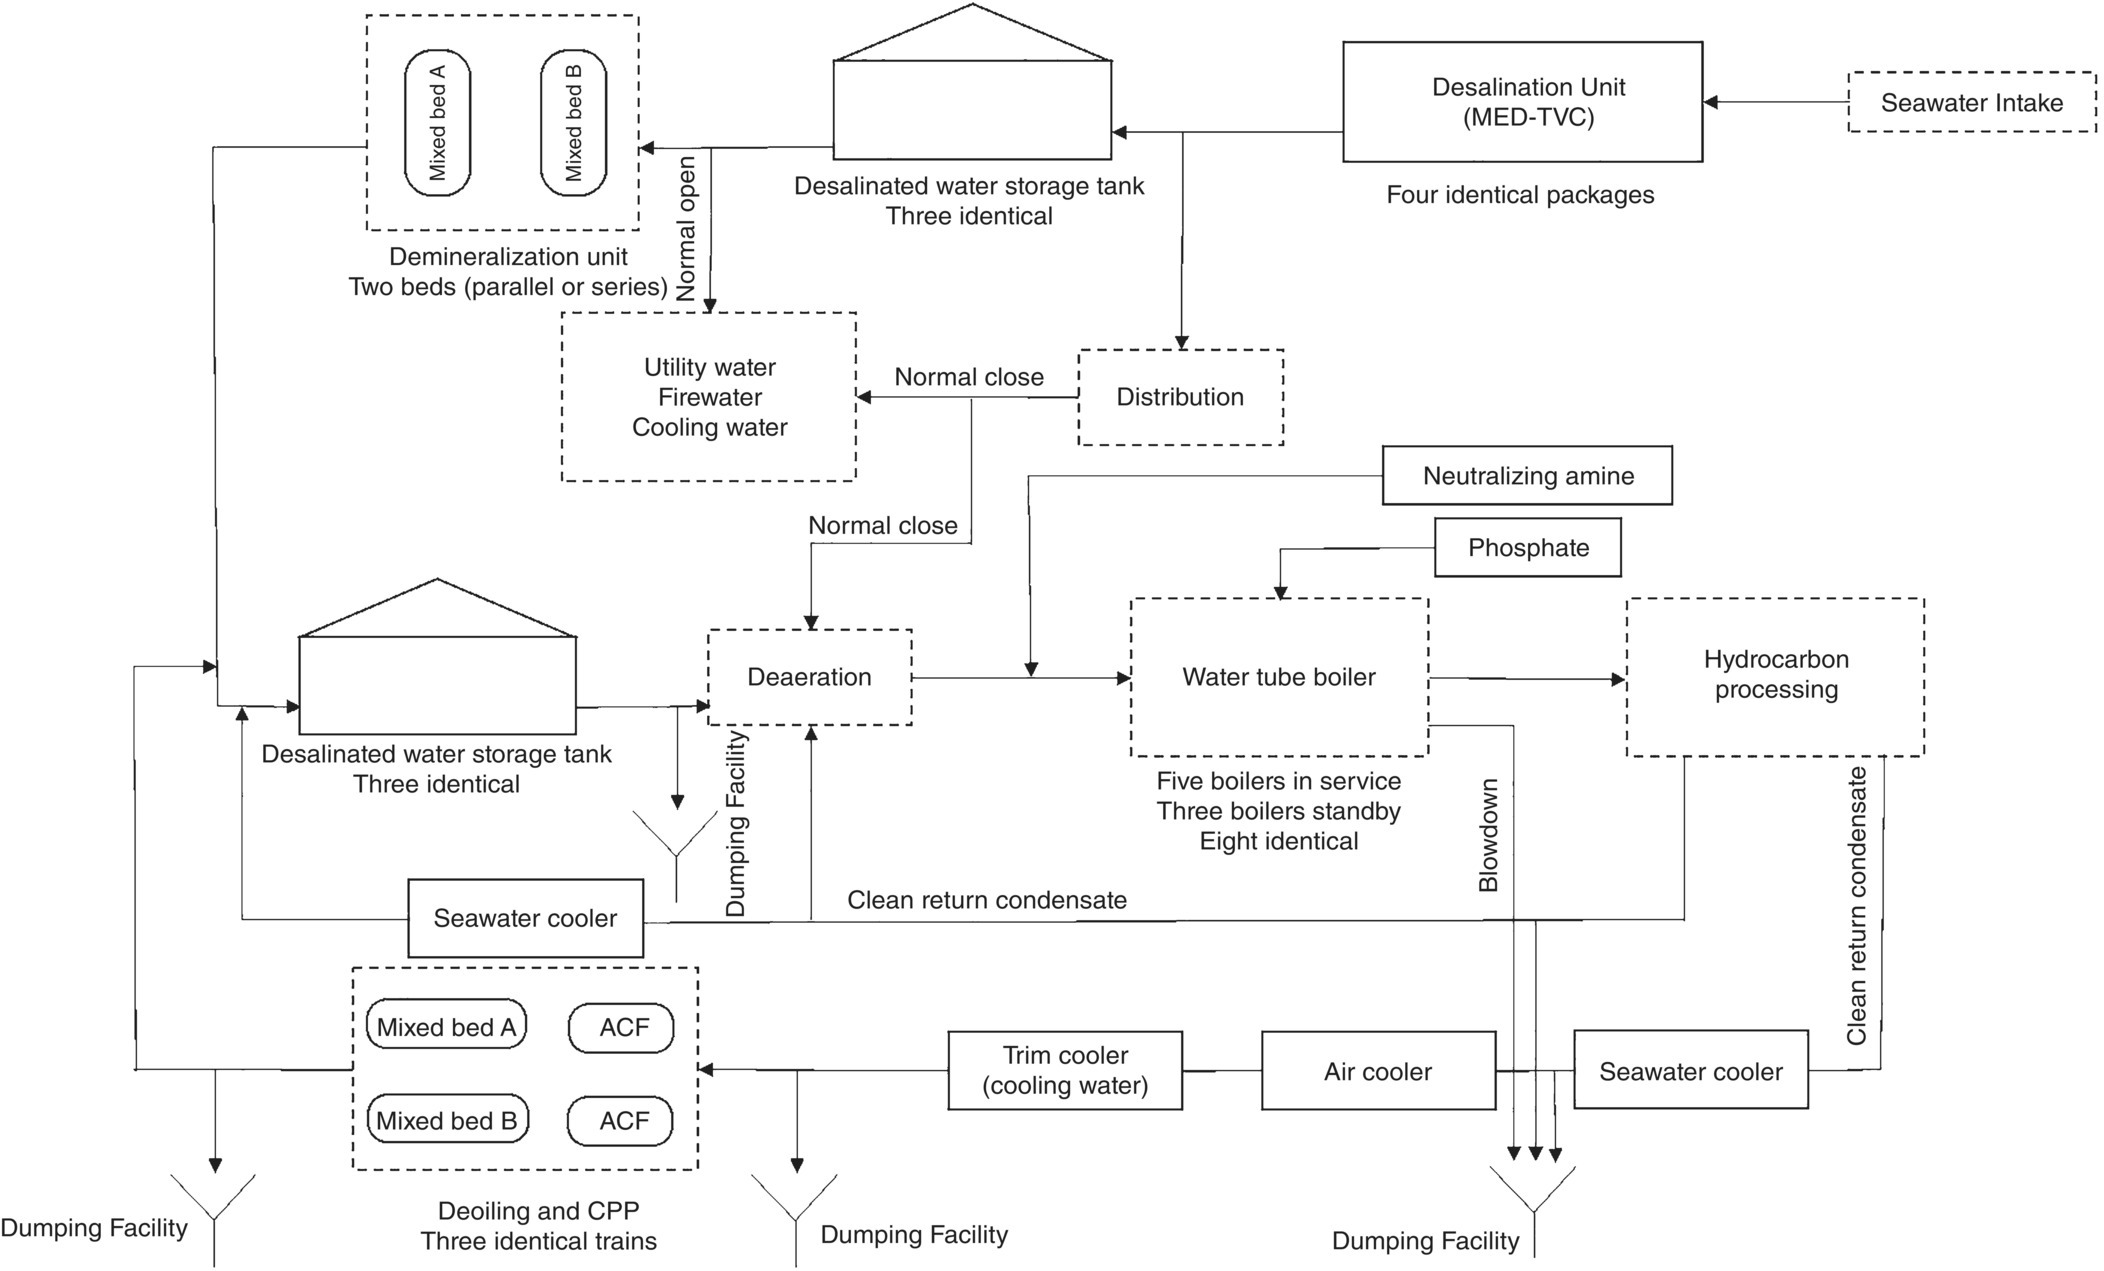 Schematic illustration of seawater desalination, desalinated water distribution, steam generation, and condensate purification-deoiling system.